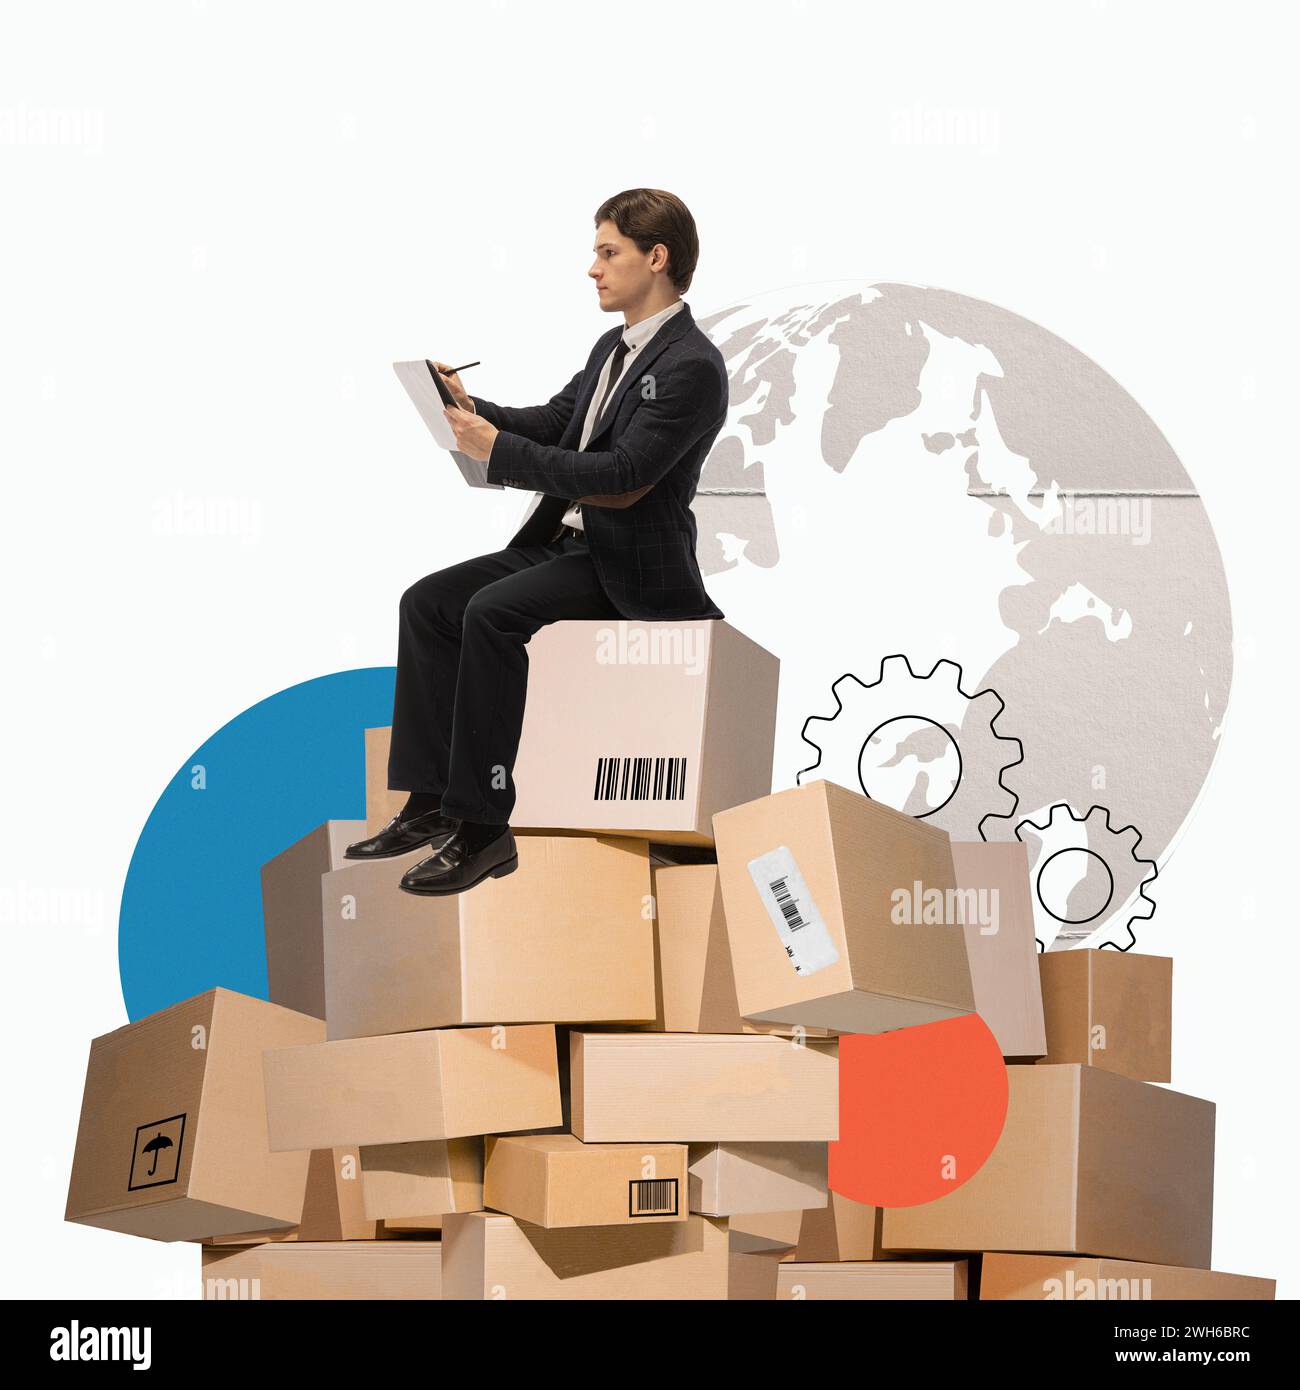 Man sitting on cardboard boxes and making notes over world map background. Global distribution. Creative modern design. Stock Photo